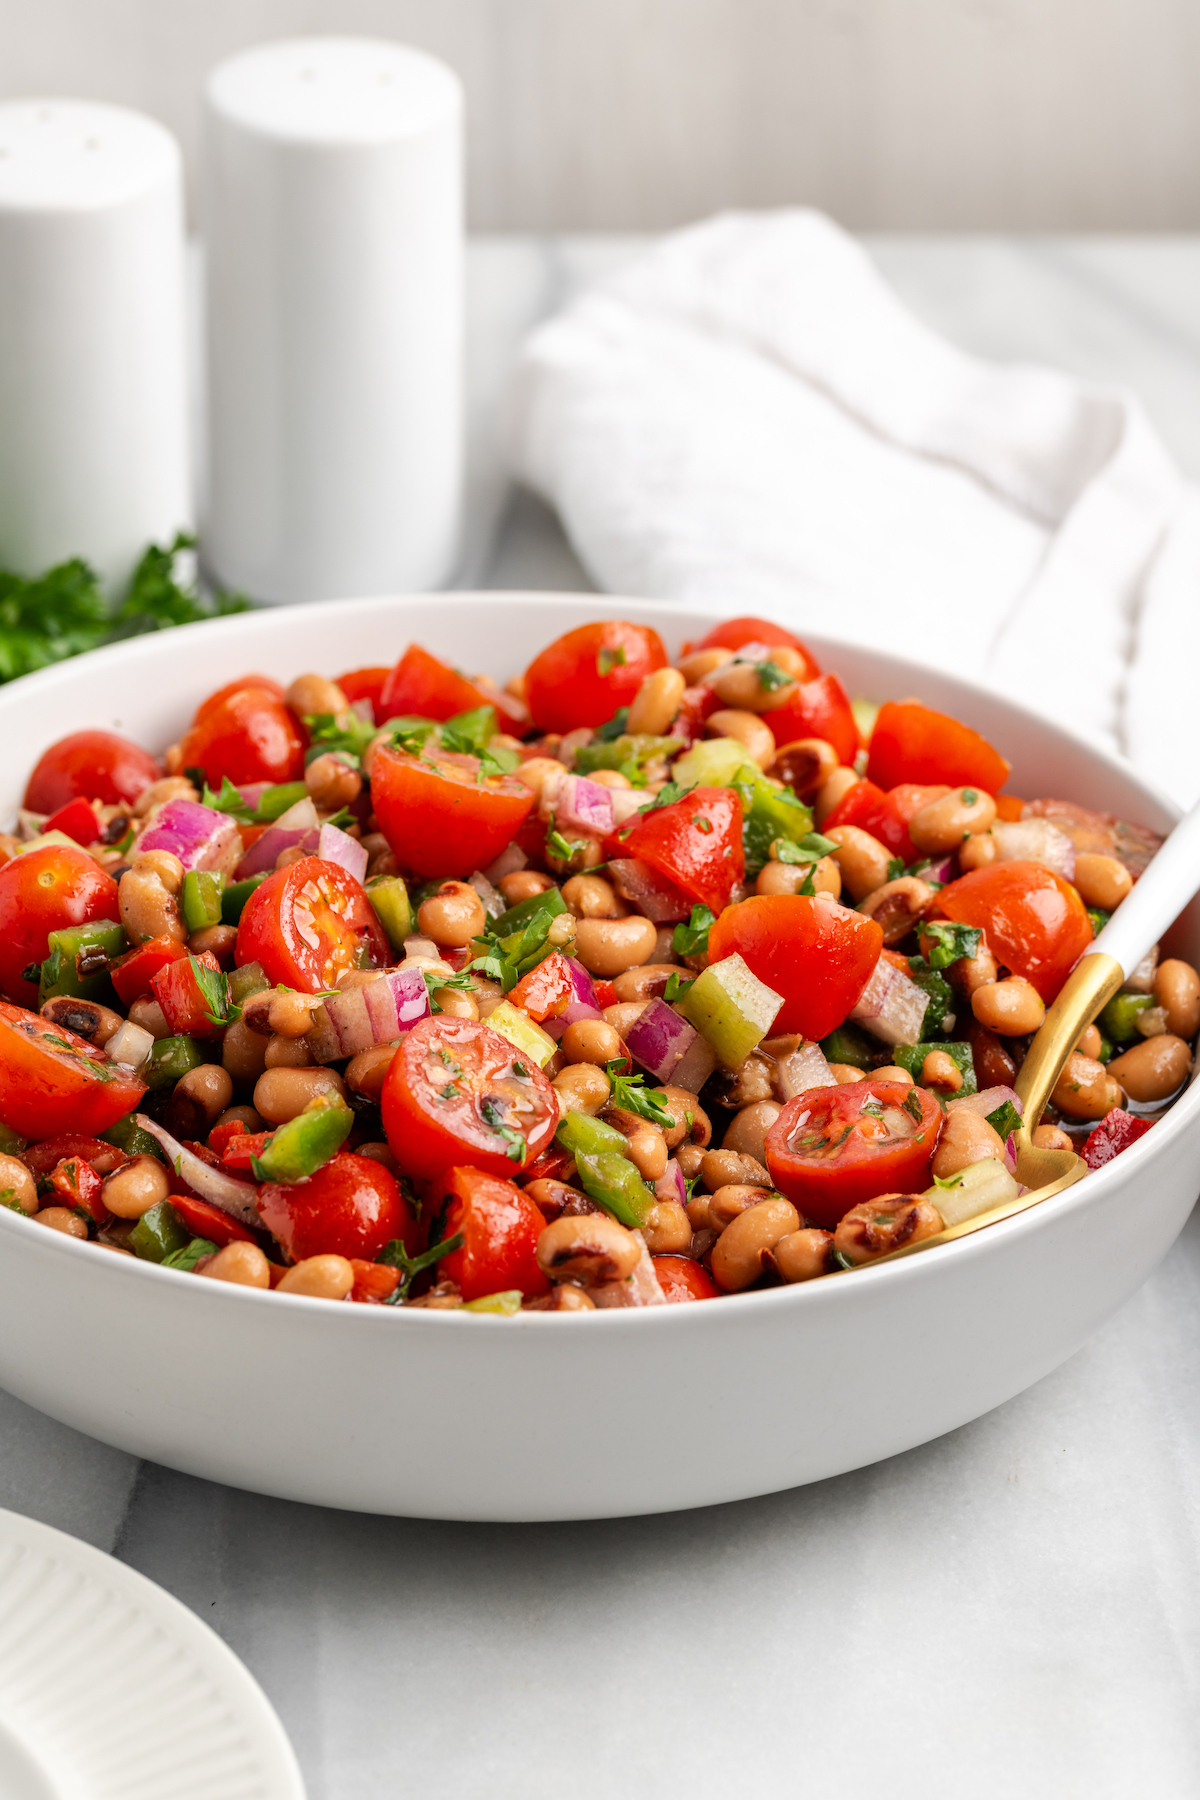 Large white bowl of black-eyed pea salad with spoon